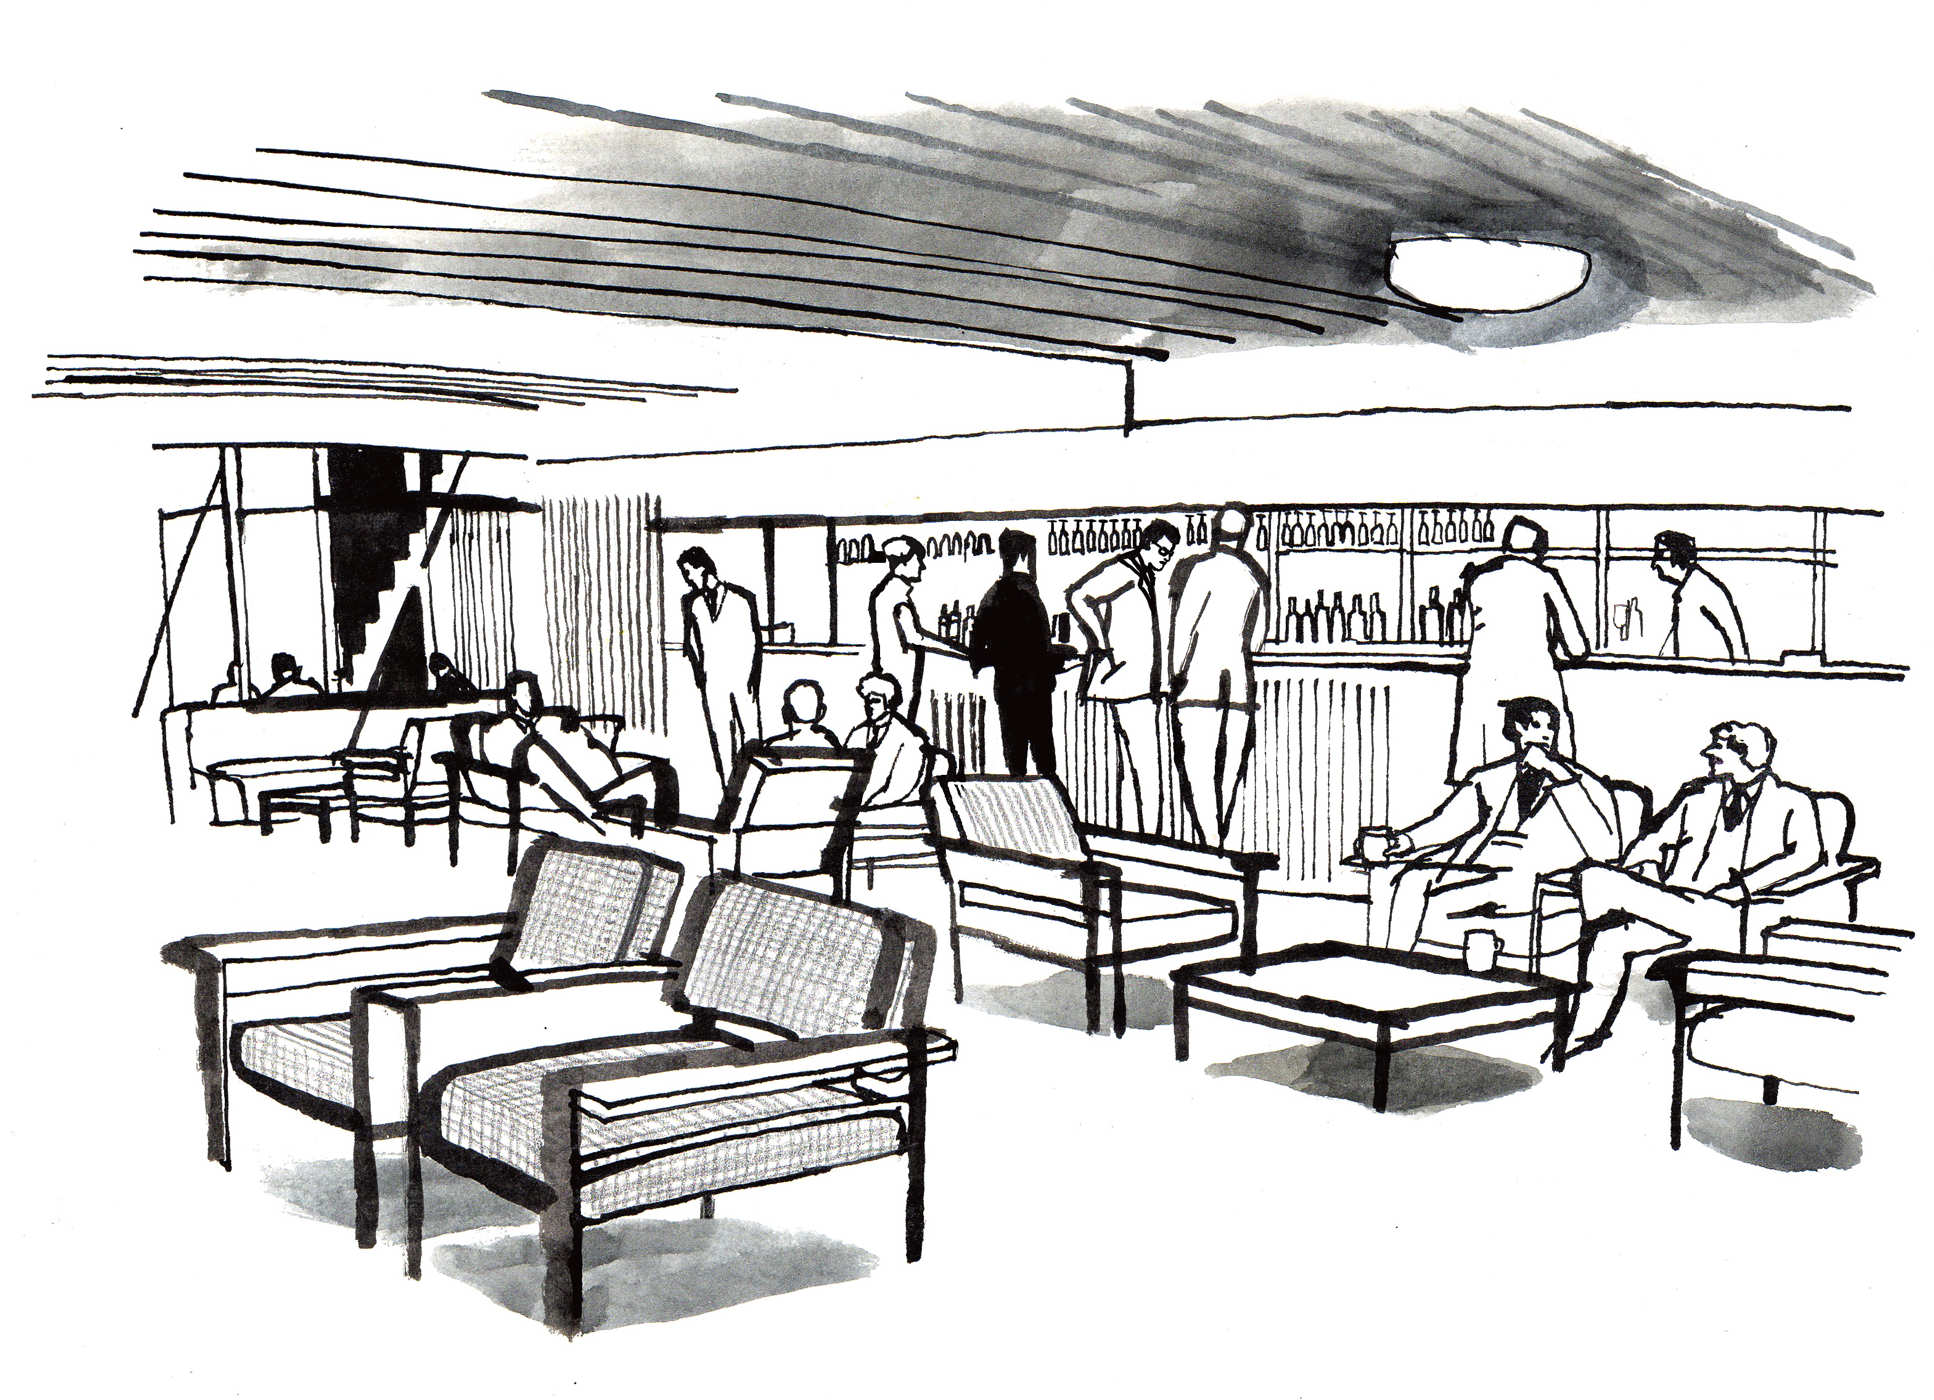 An illustration of the Southside Bar at the South Kensington Campus in the 1960s